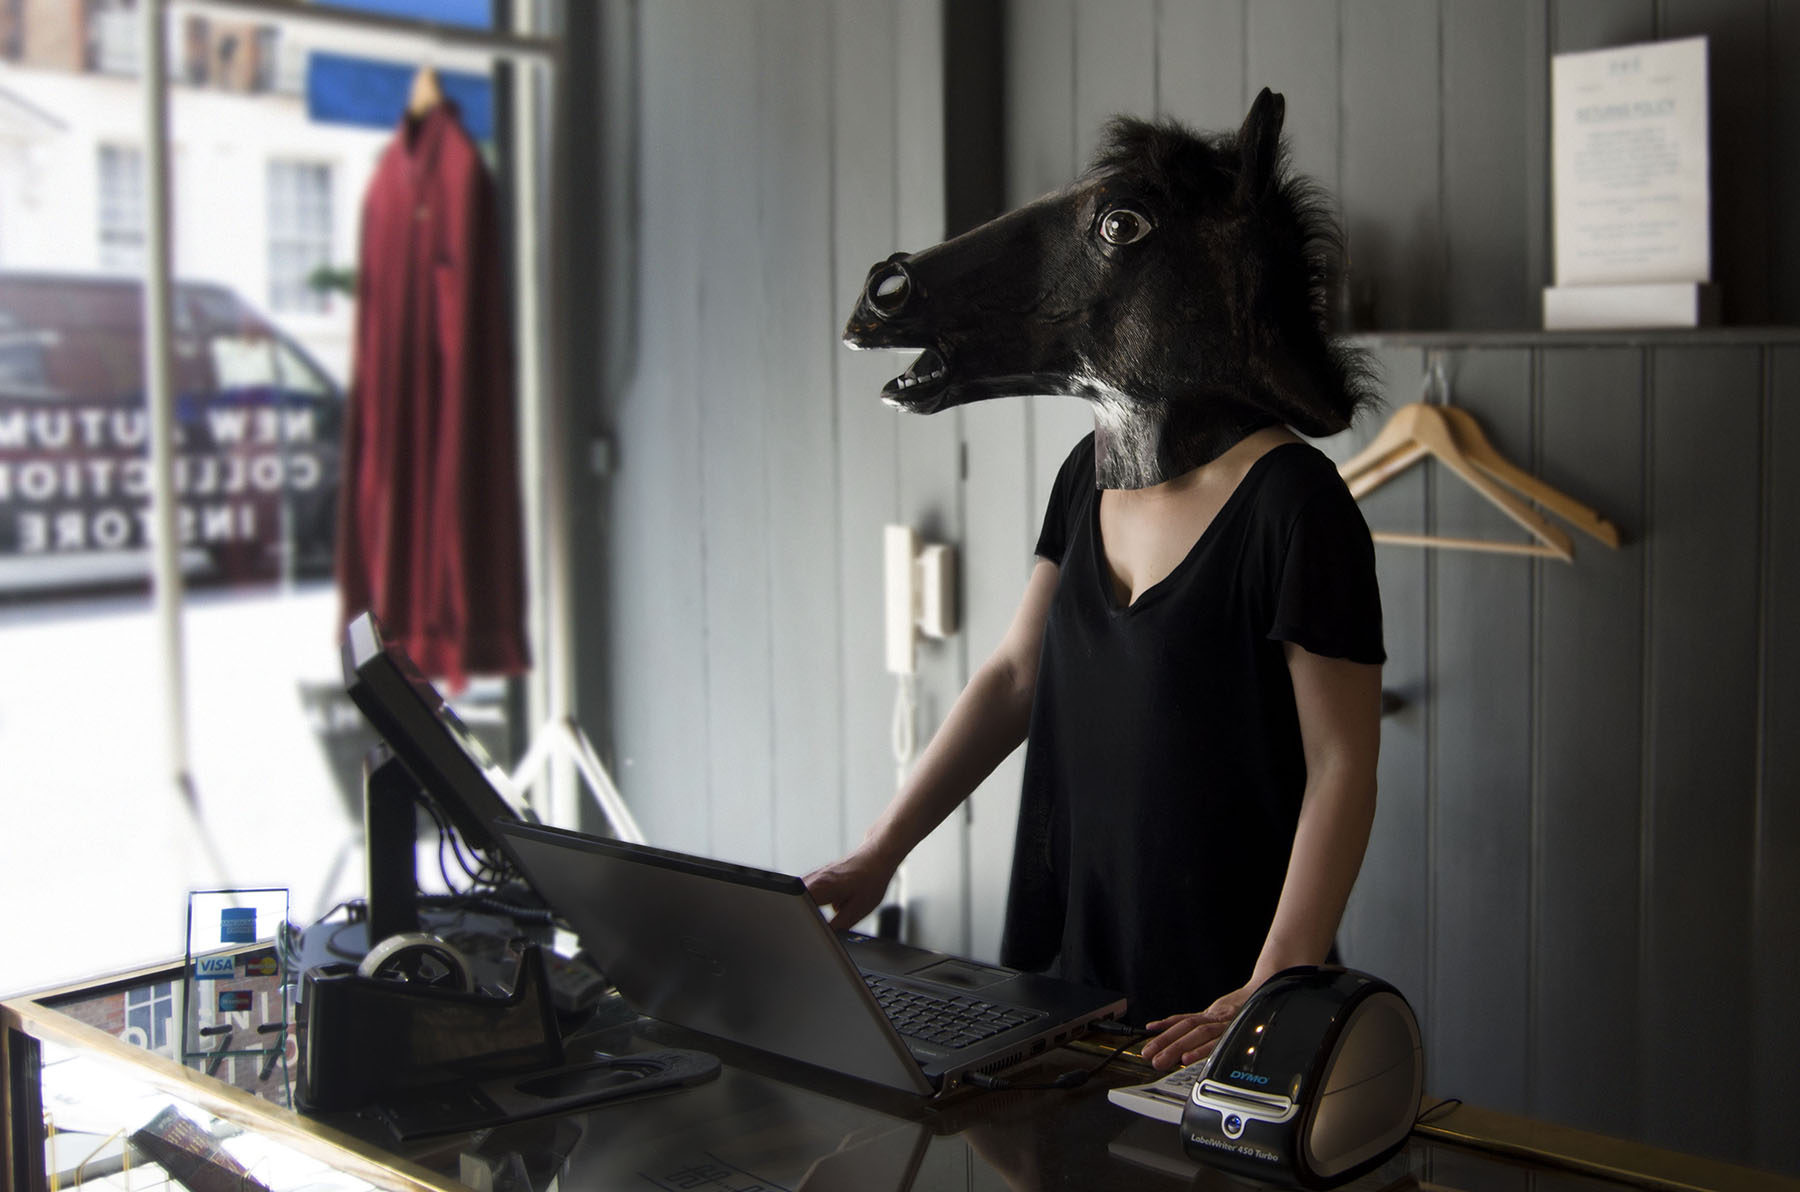 Beast - person wearing horse mask at clothing store cashdesk